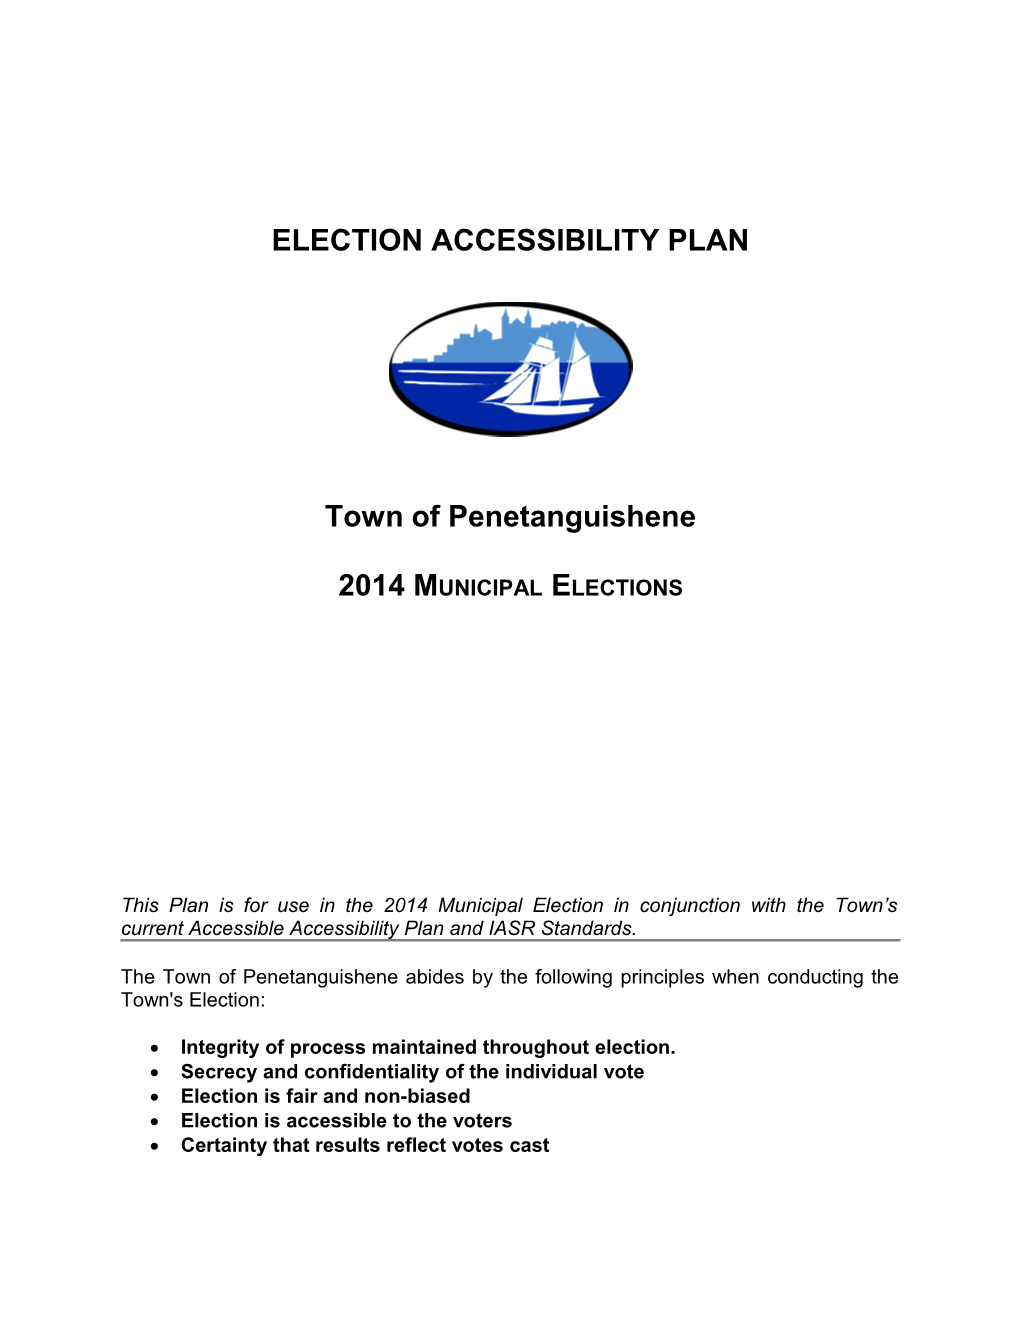 Election Accessibility Plan